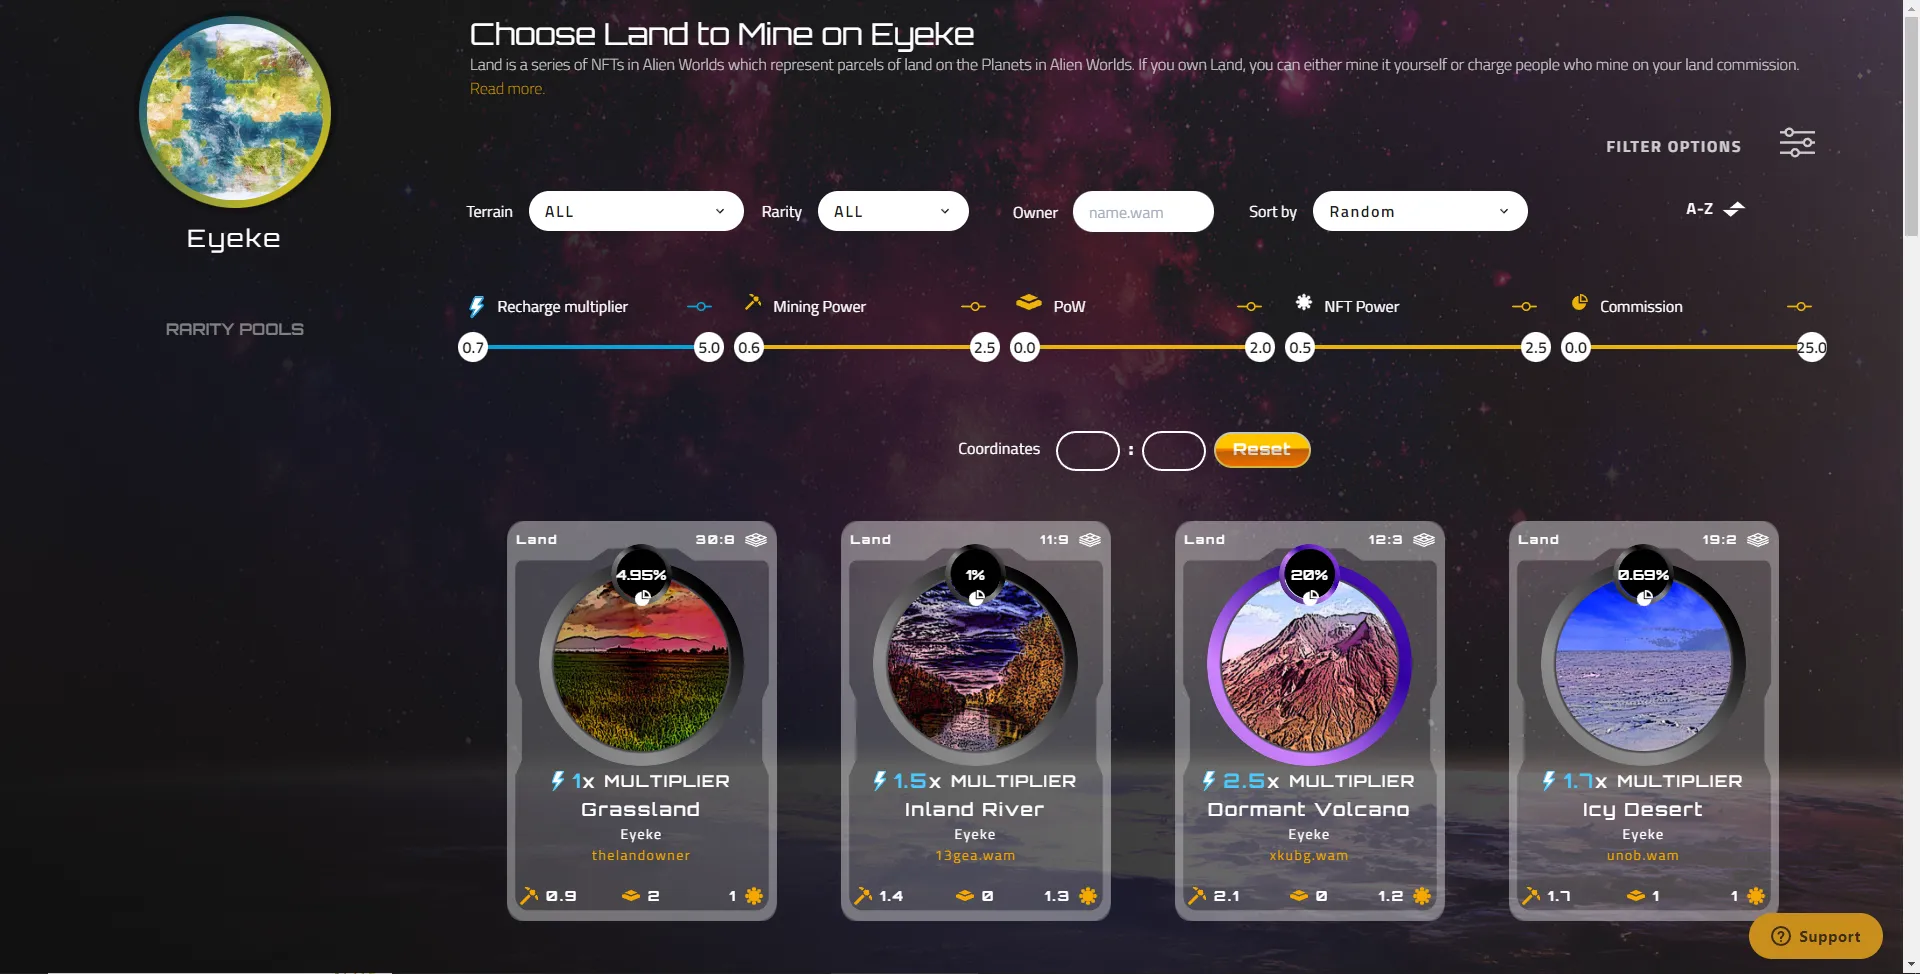 After selecting a planet in Alien Worlds, players can then choose from multiple lands available on that planet to start their mining adventure.